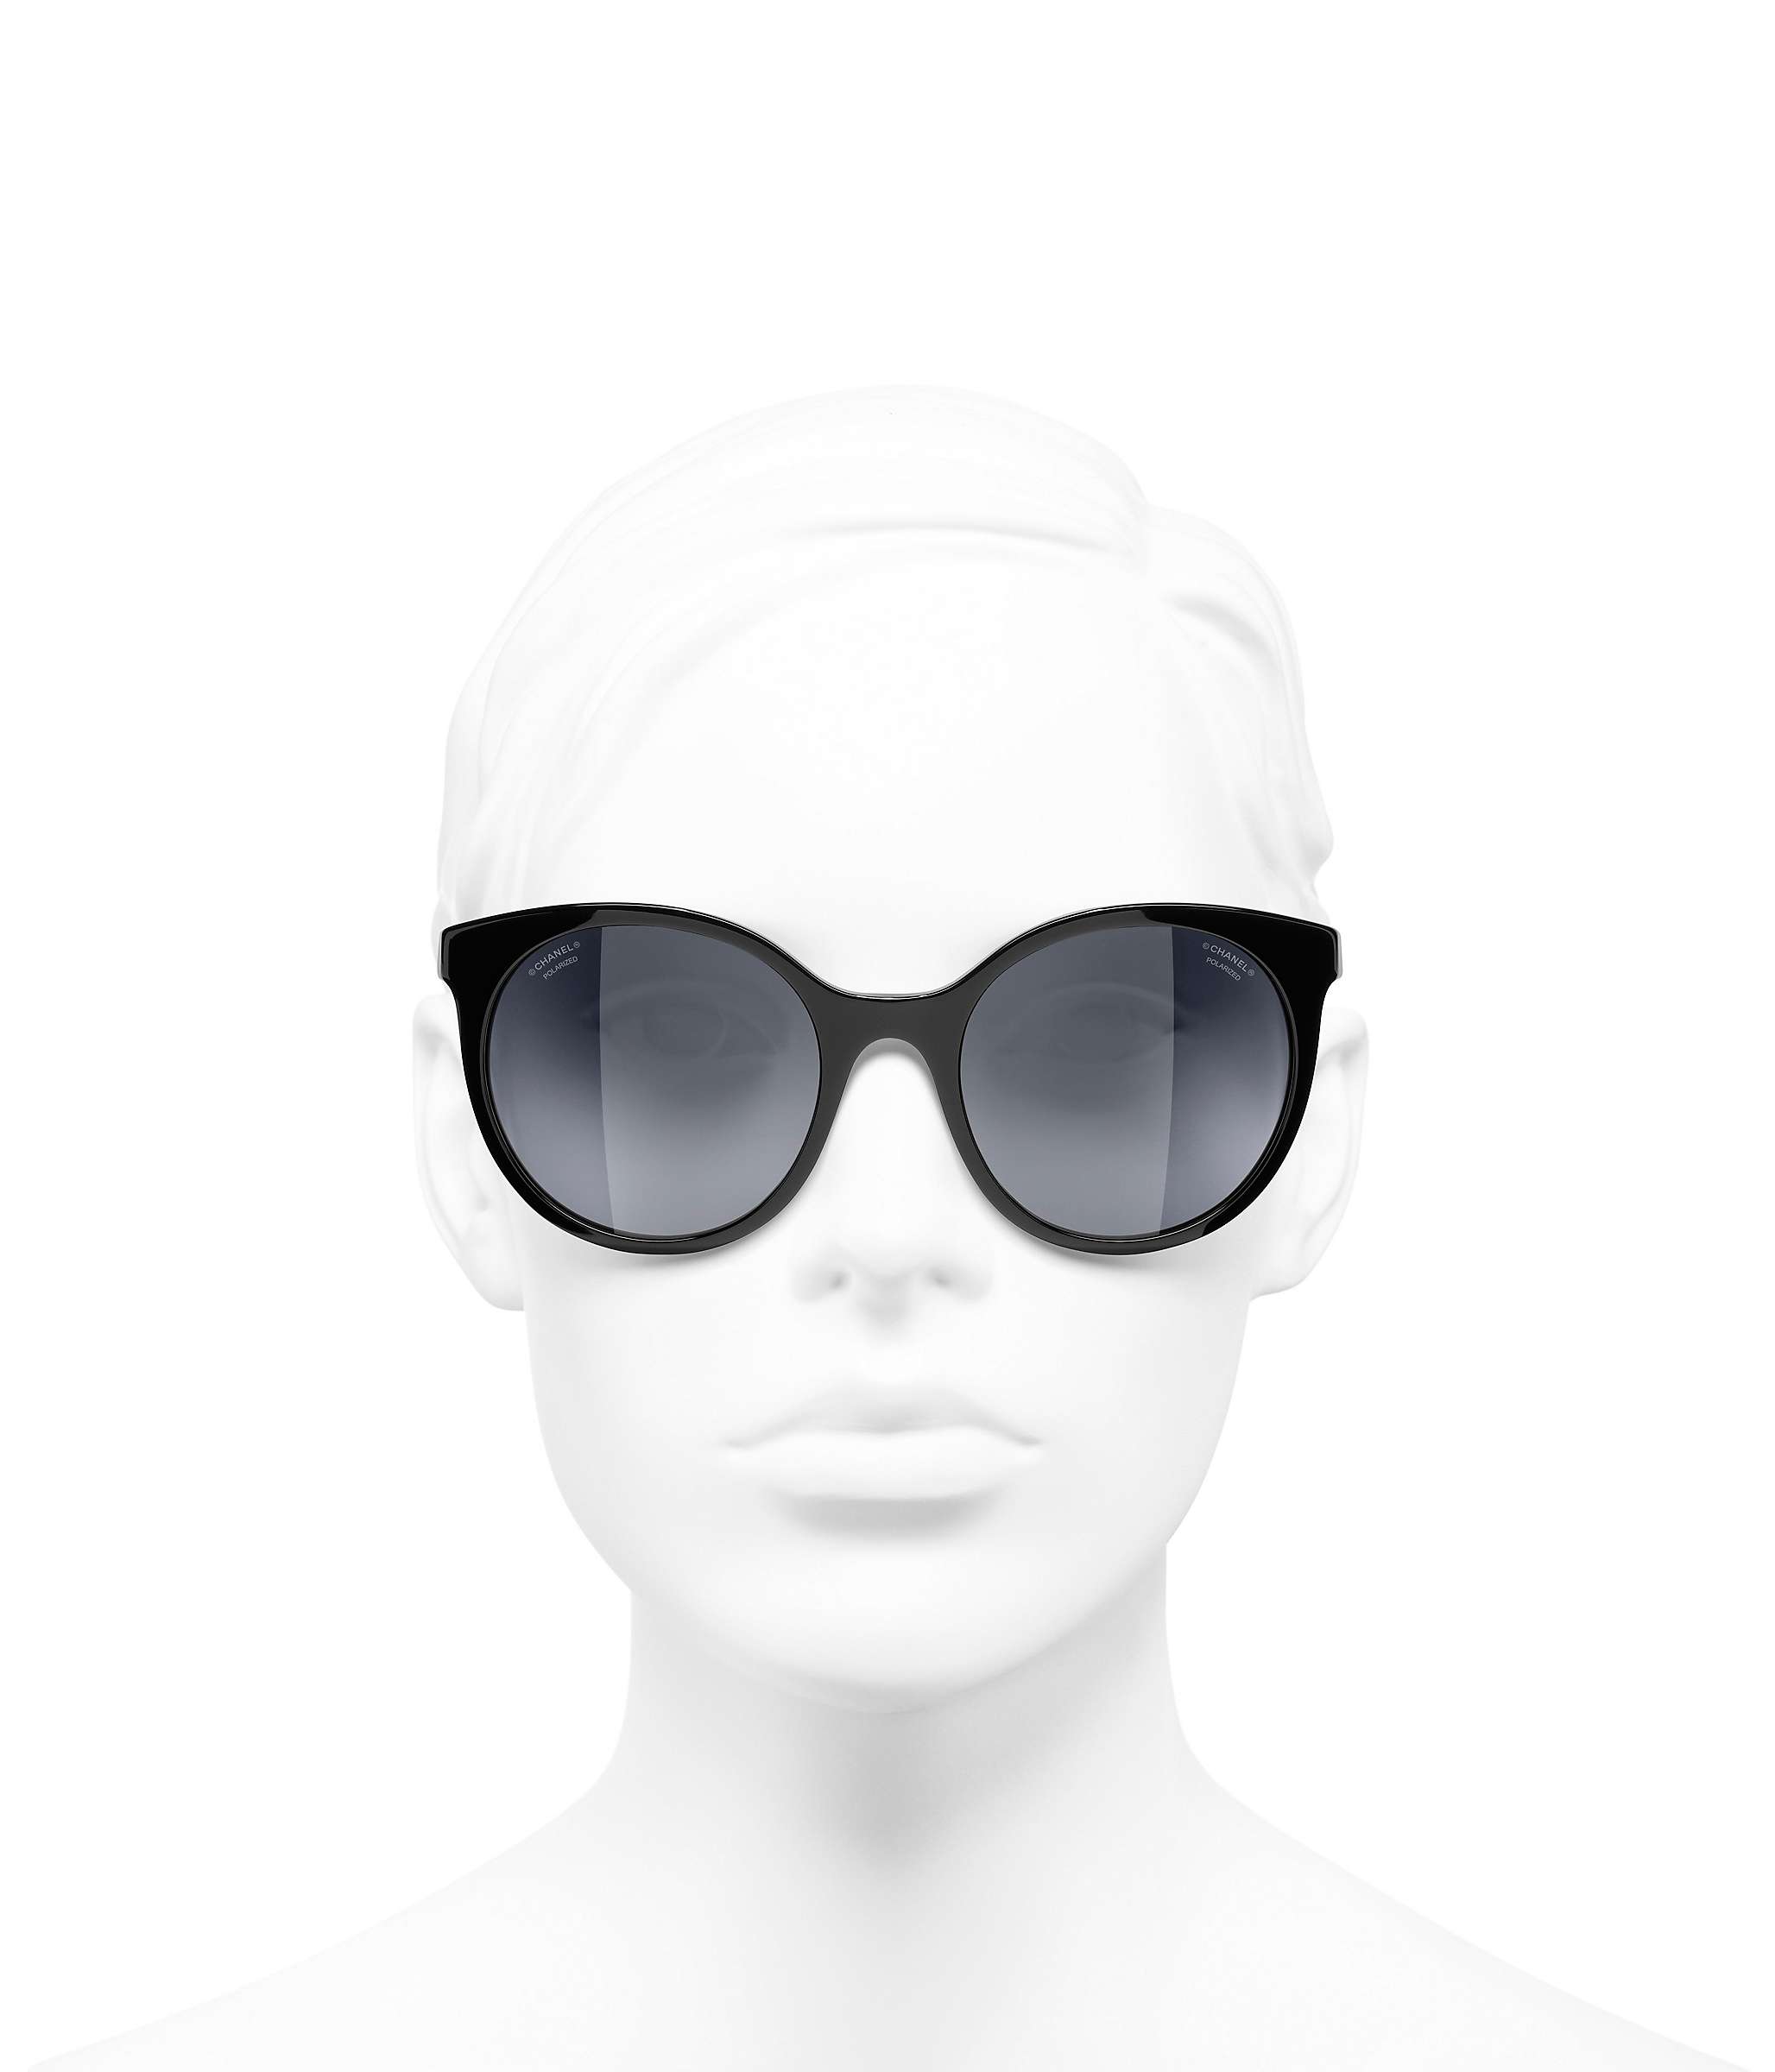 Buy CHANEL Oval Sunglasses CH5440 Black/Grey Gradient Online at johnlewis.com